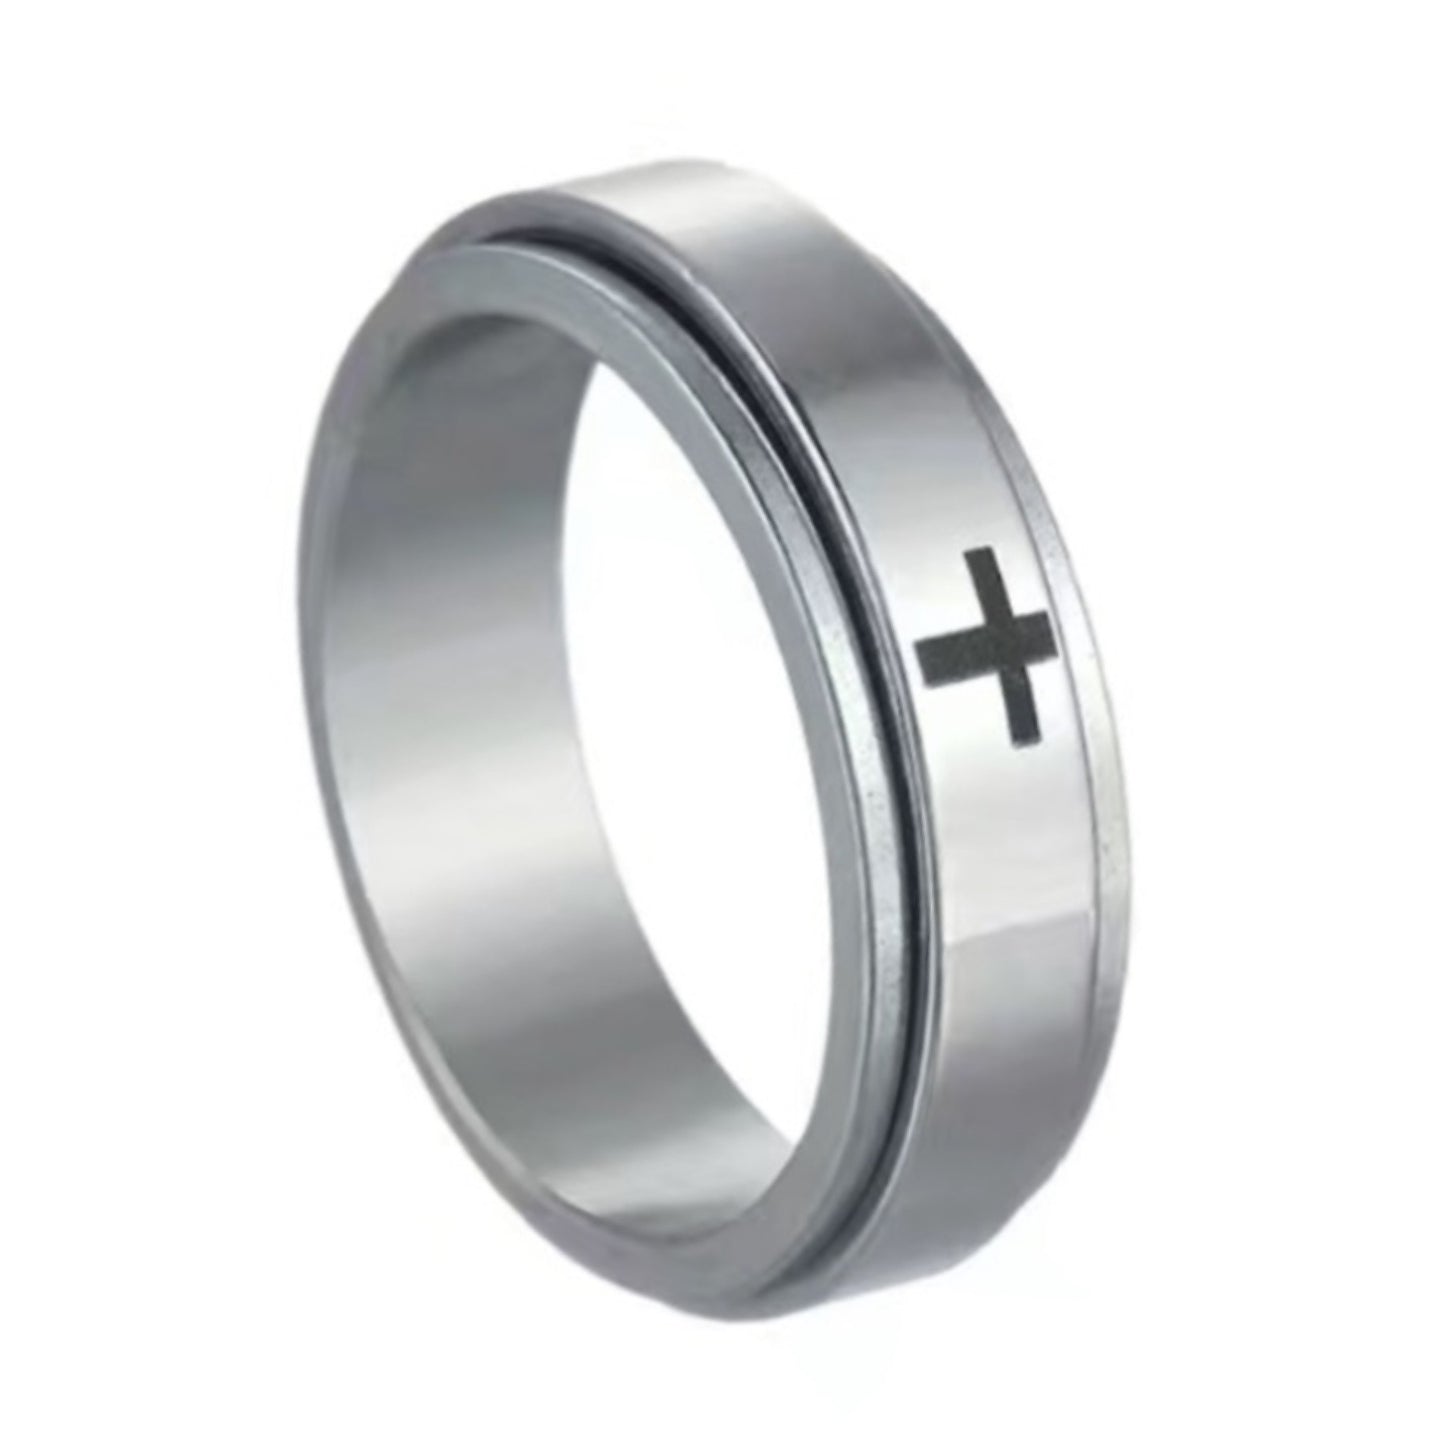 Stainless Steel Tiny Cross Anxiety Fidget Spinner Ring